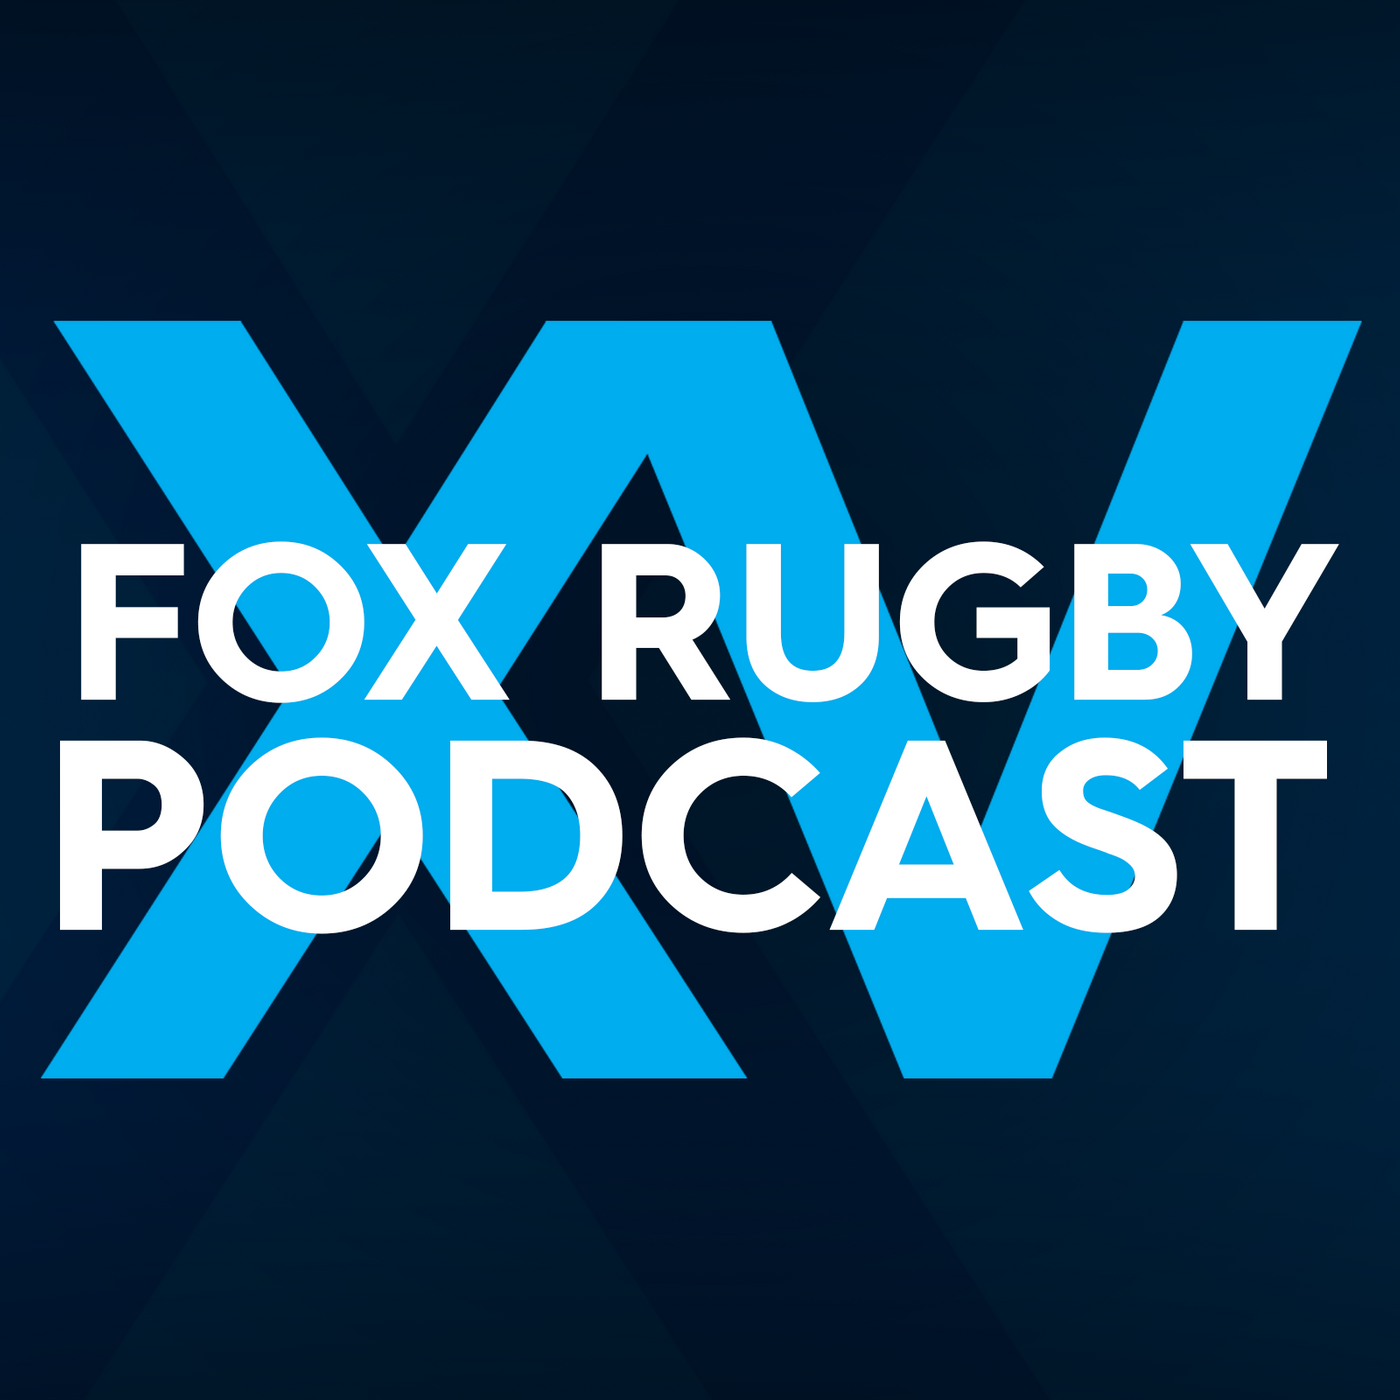 GEORGE GREGAN & ROD KAFER PREVIEW TRI NATIONS | Initial thoughts on Wallabies performances | Stars to watch